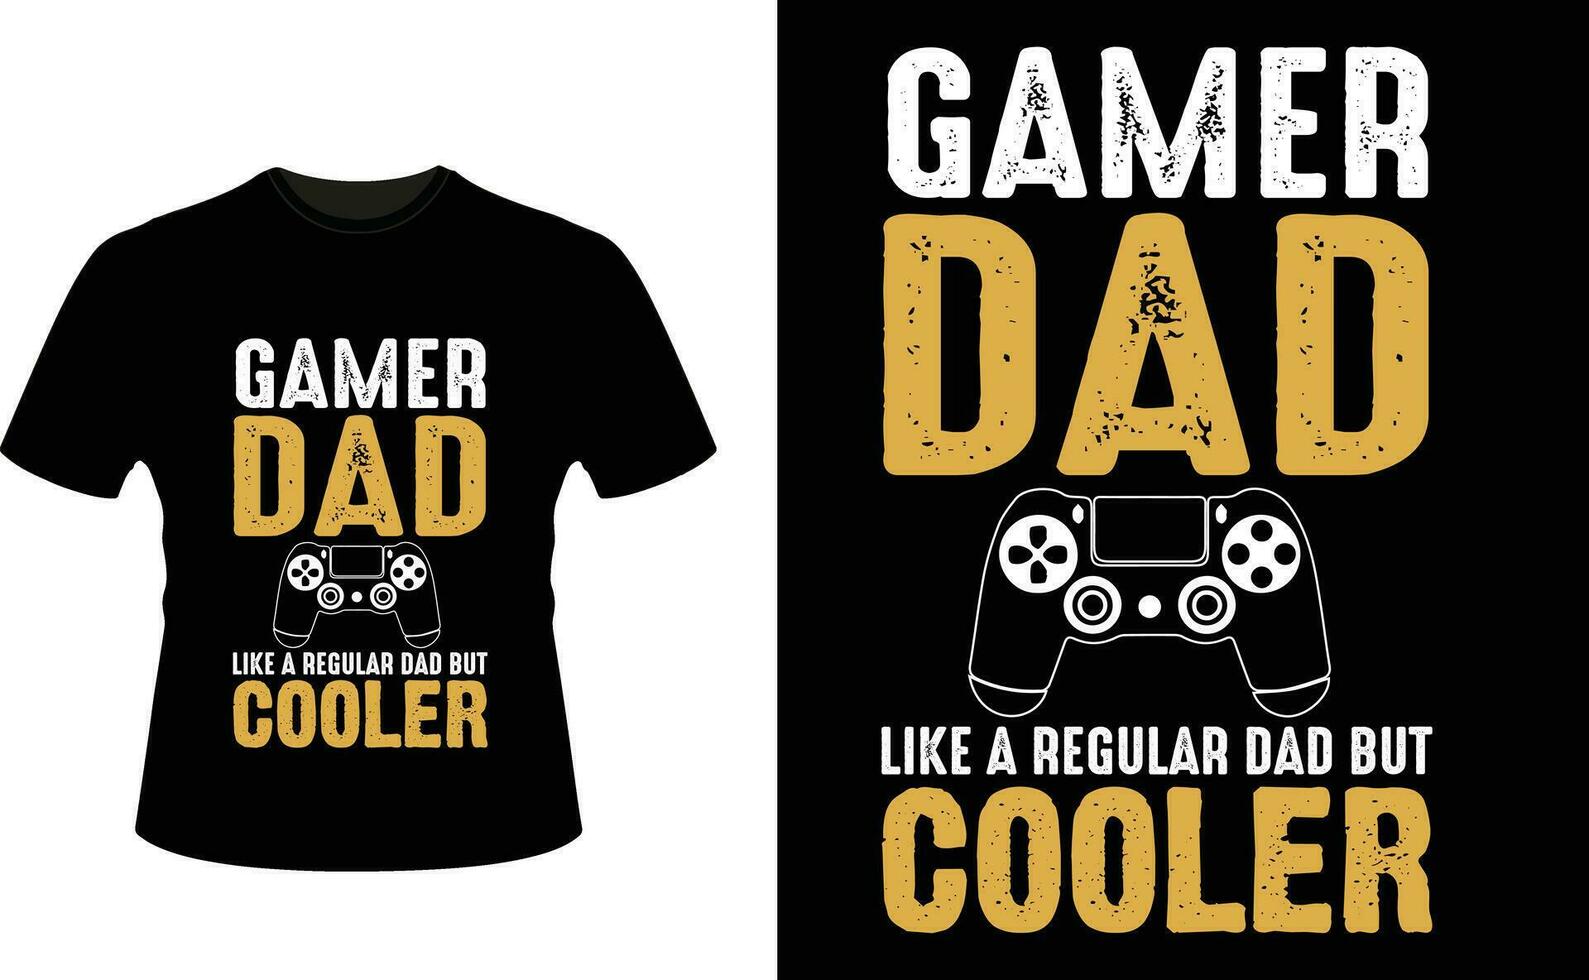 Gamer Dad Like a Regular Dad But Cooler or dad papa tshirt design or Father day t shirt Design vector